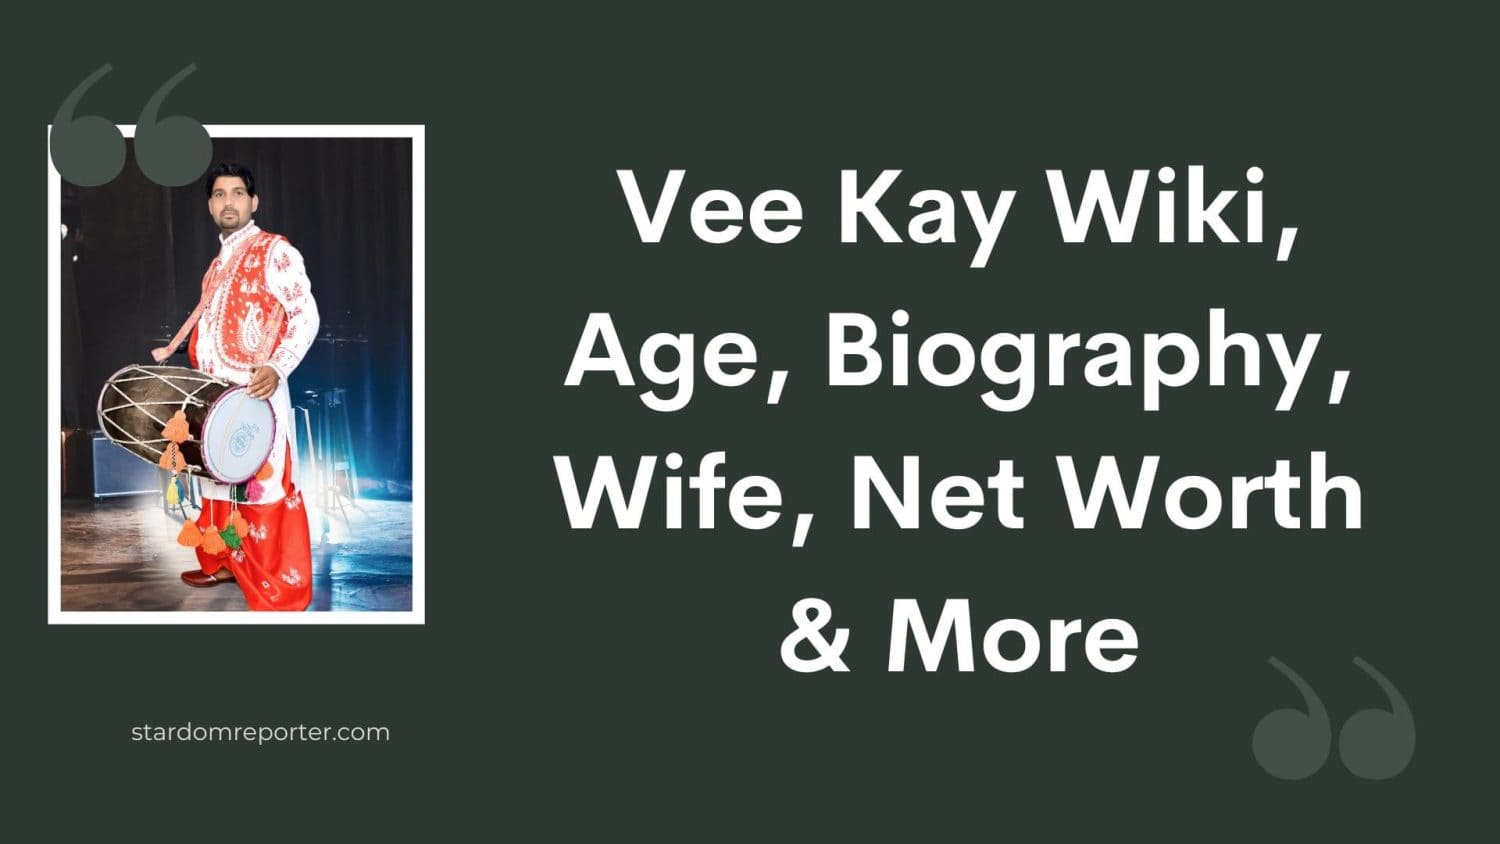 Vee Kay Wiki, Age, Biography, Wife, Net Worth & More - 17